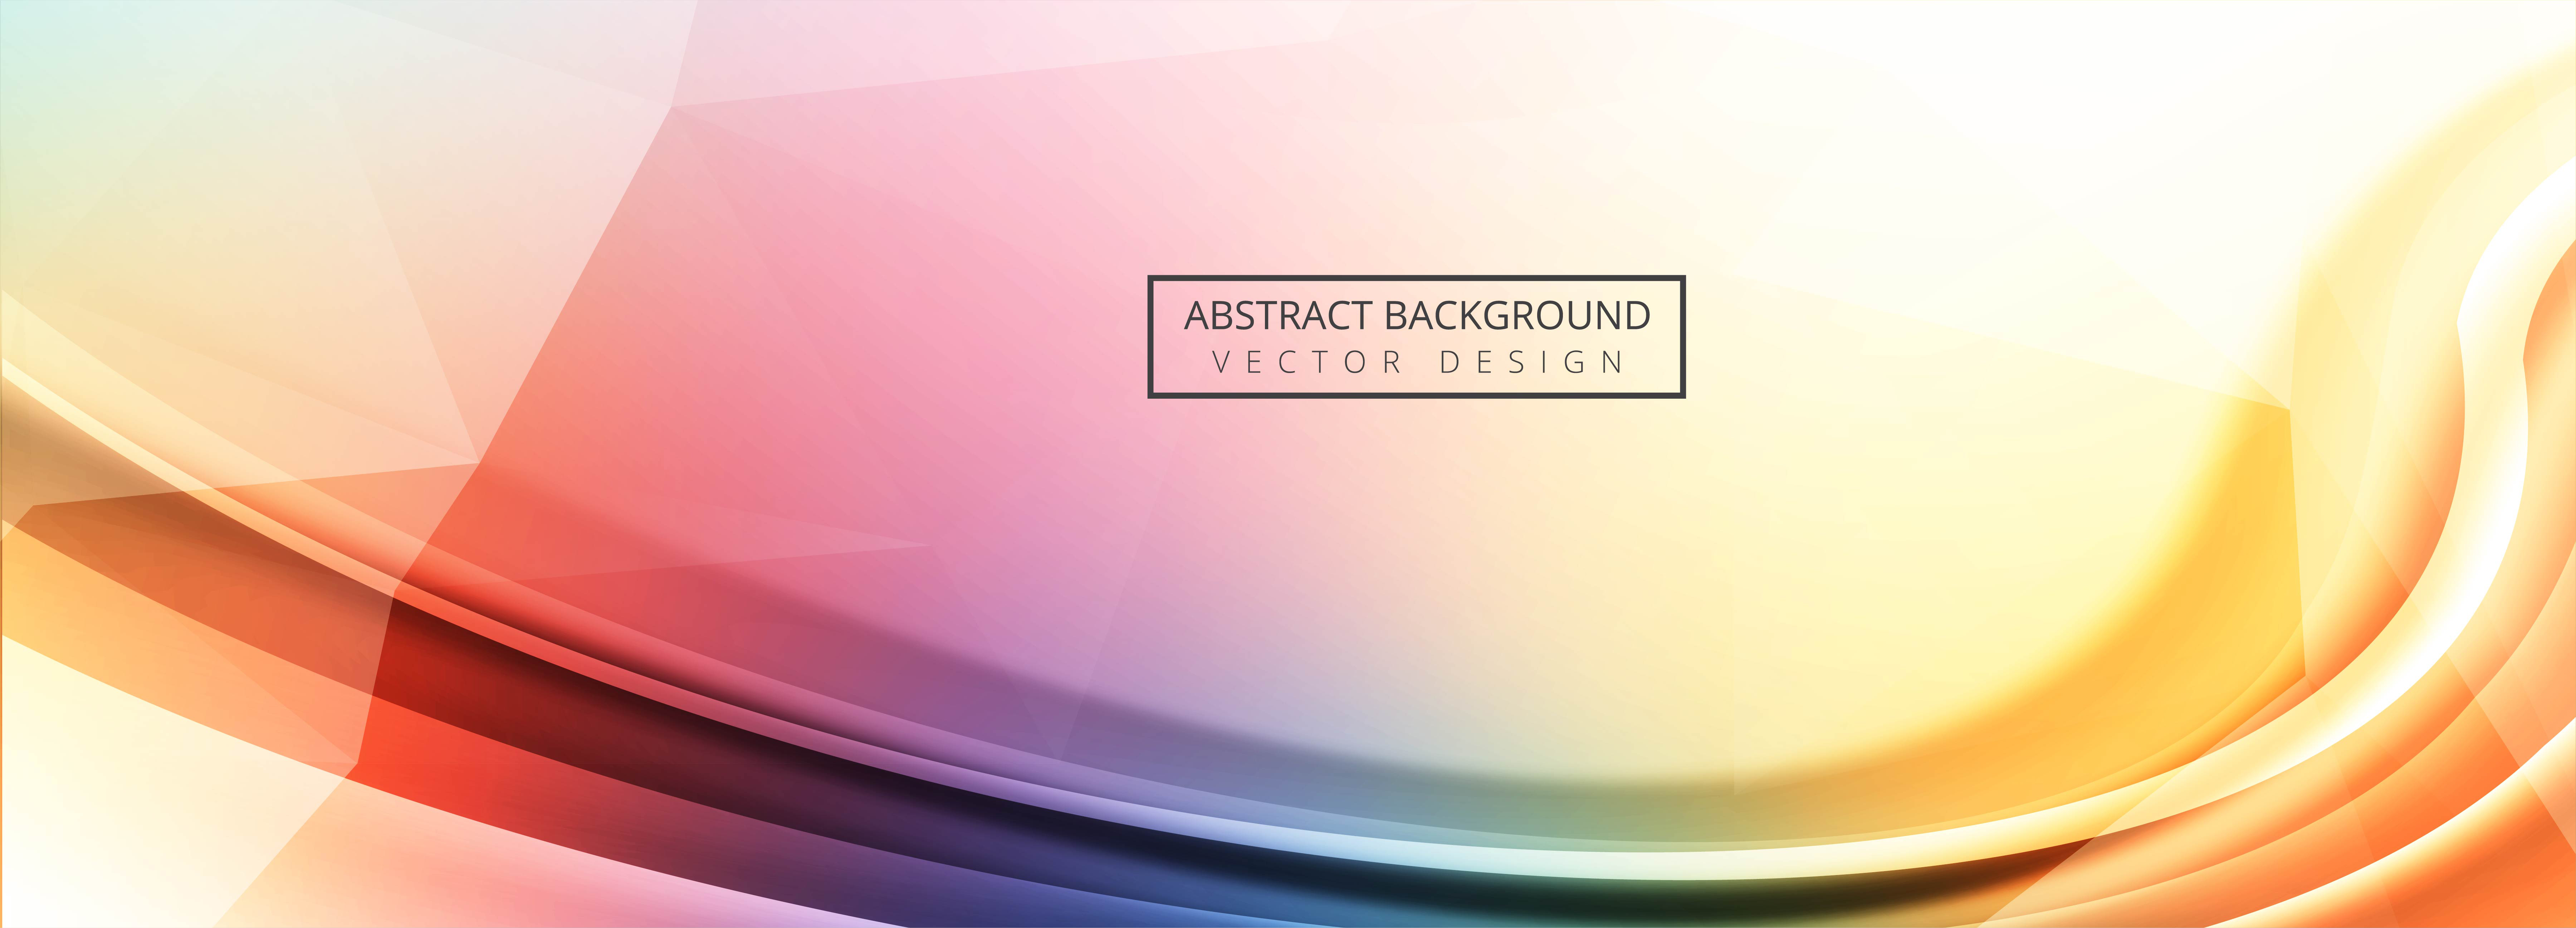 Modern colorful wave banner template background 686771 Download Free